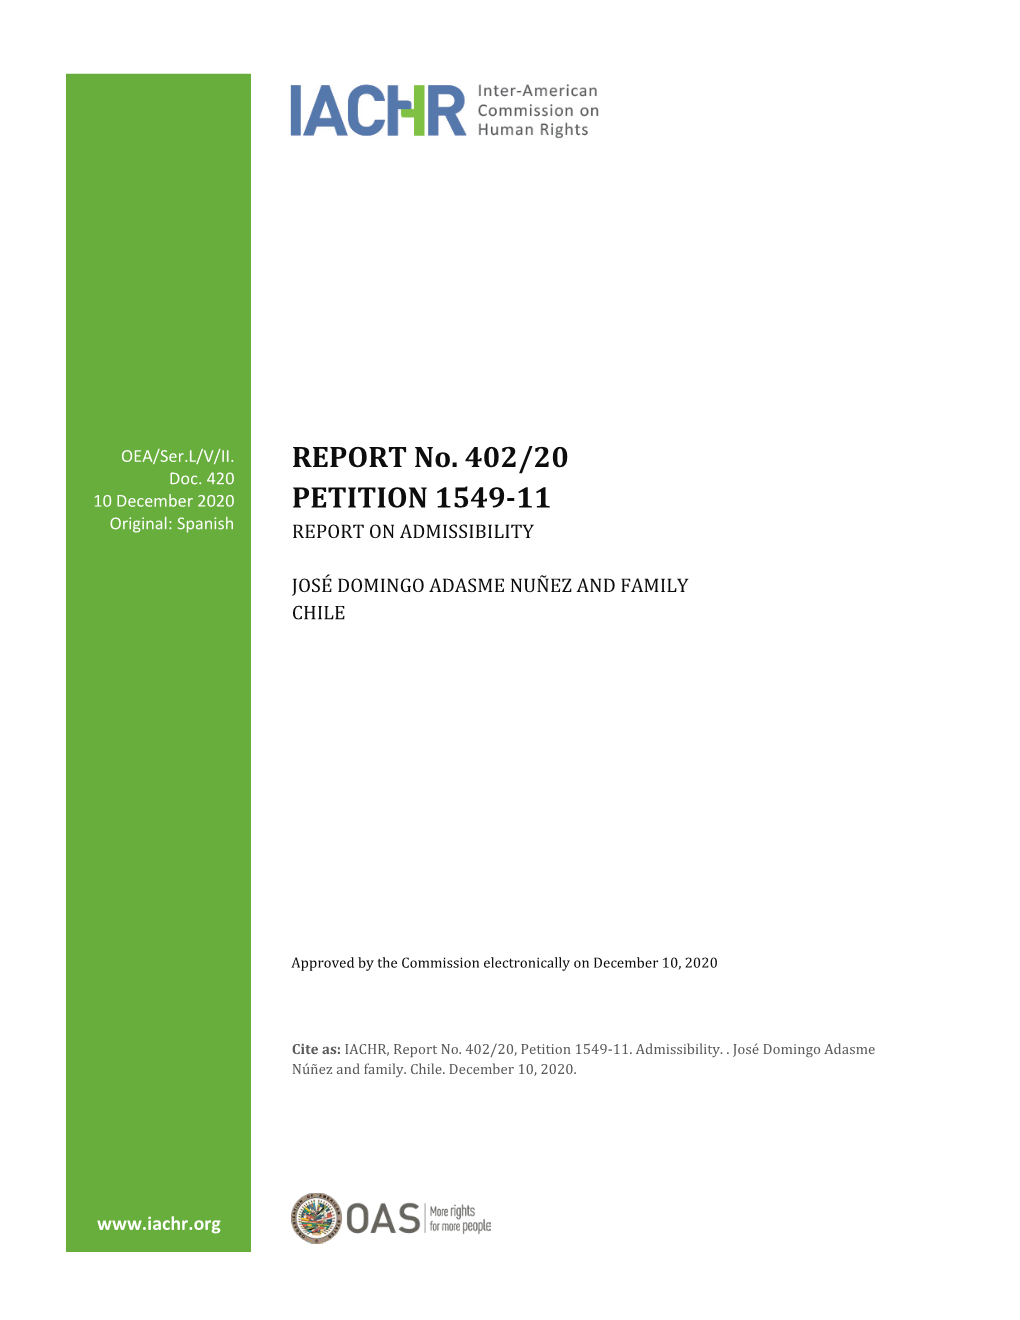 REPORT No. 402/20 PETITION 1549-11